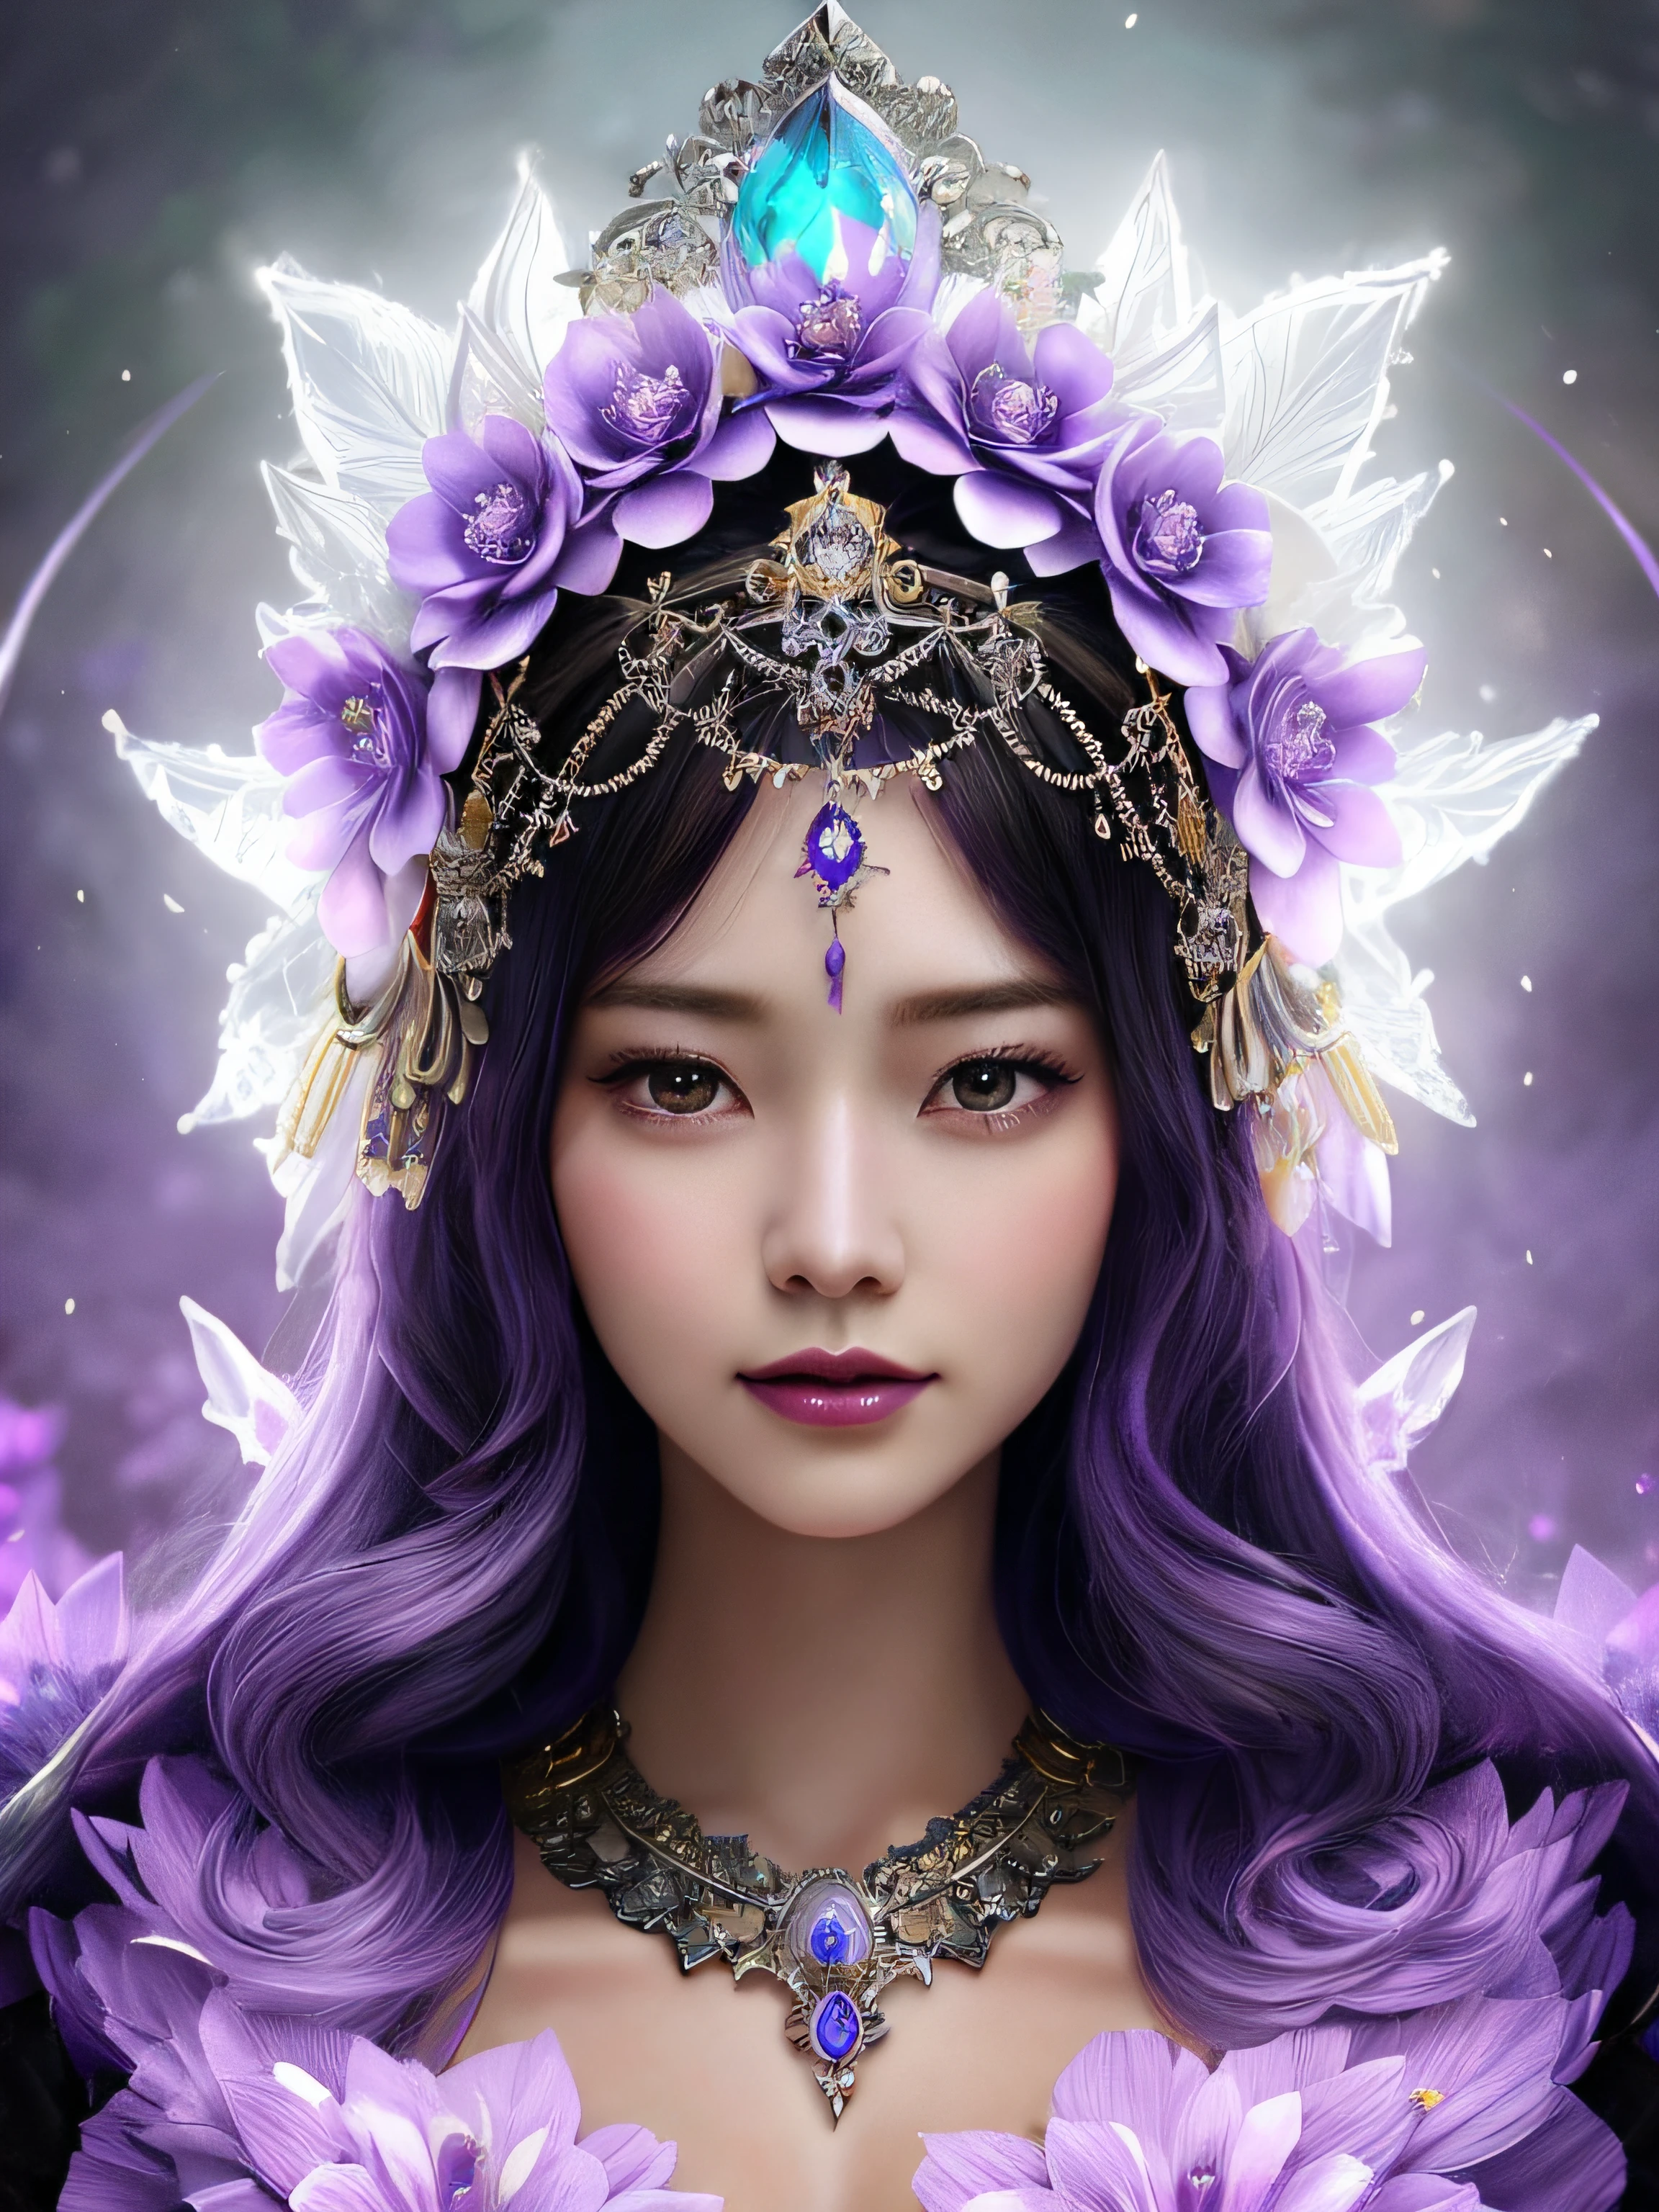 a woman with purple hair and a crown on her head, fantasy art style, epic fantasy art style hd, digital fantasy art ), detailed fantasy digital art, digital 2d fantasy art, 8k high quality detailed art, digital art fantasy art, a beautiful fantasy empress, digital art fantasy, detailed digital 2d fantasy art, fantasy style art, beautiful fantasy art